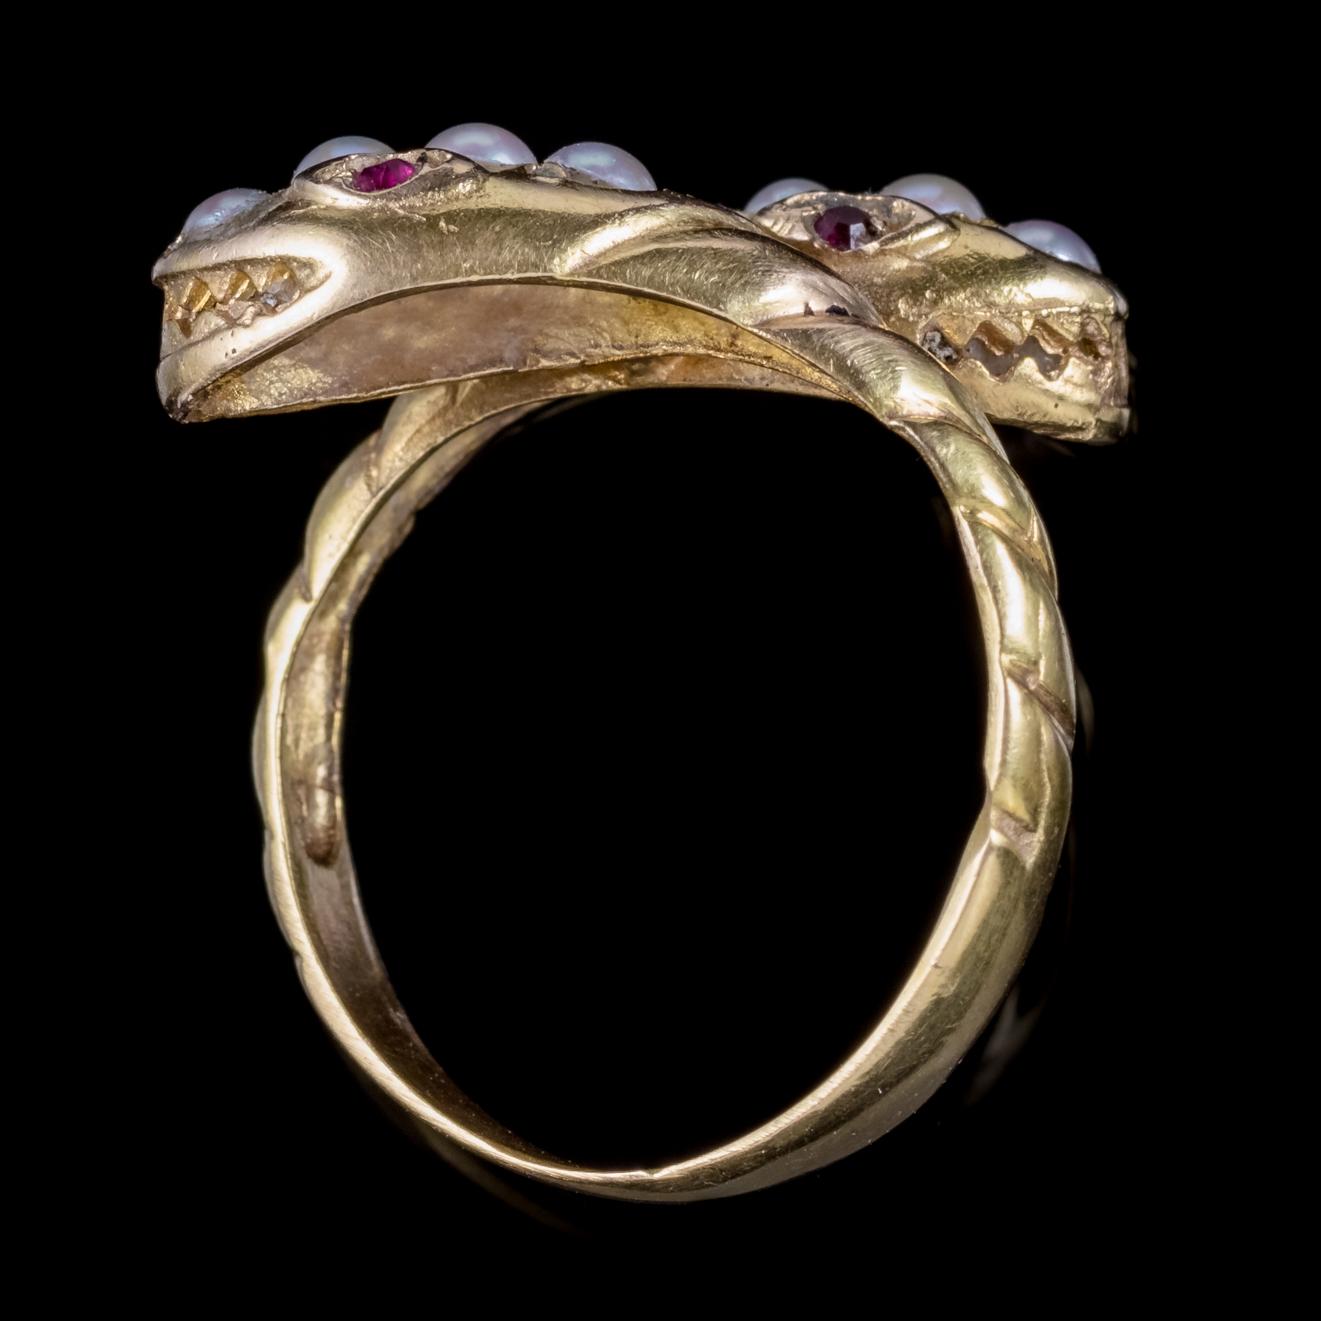 Antique Victorian Ruby Pearl Snake Ring 18 Carat Gold, circa 1880 For Sale 1